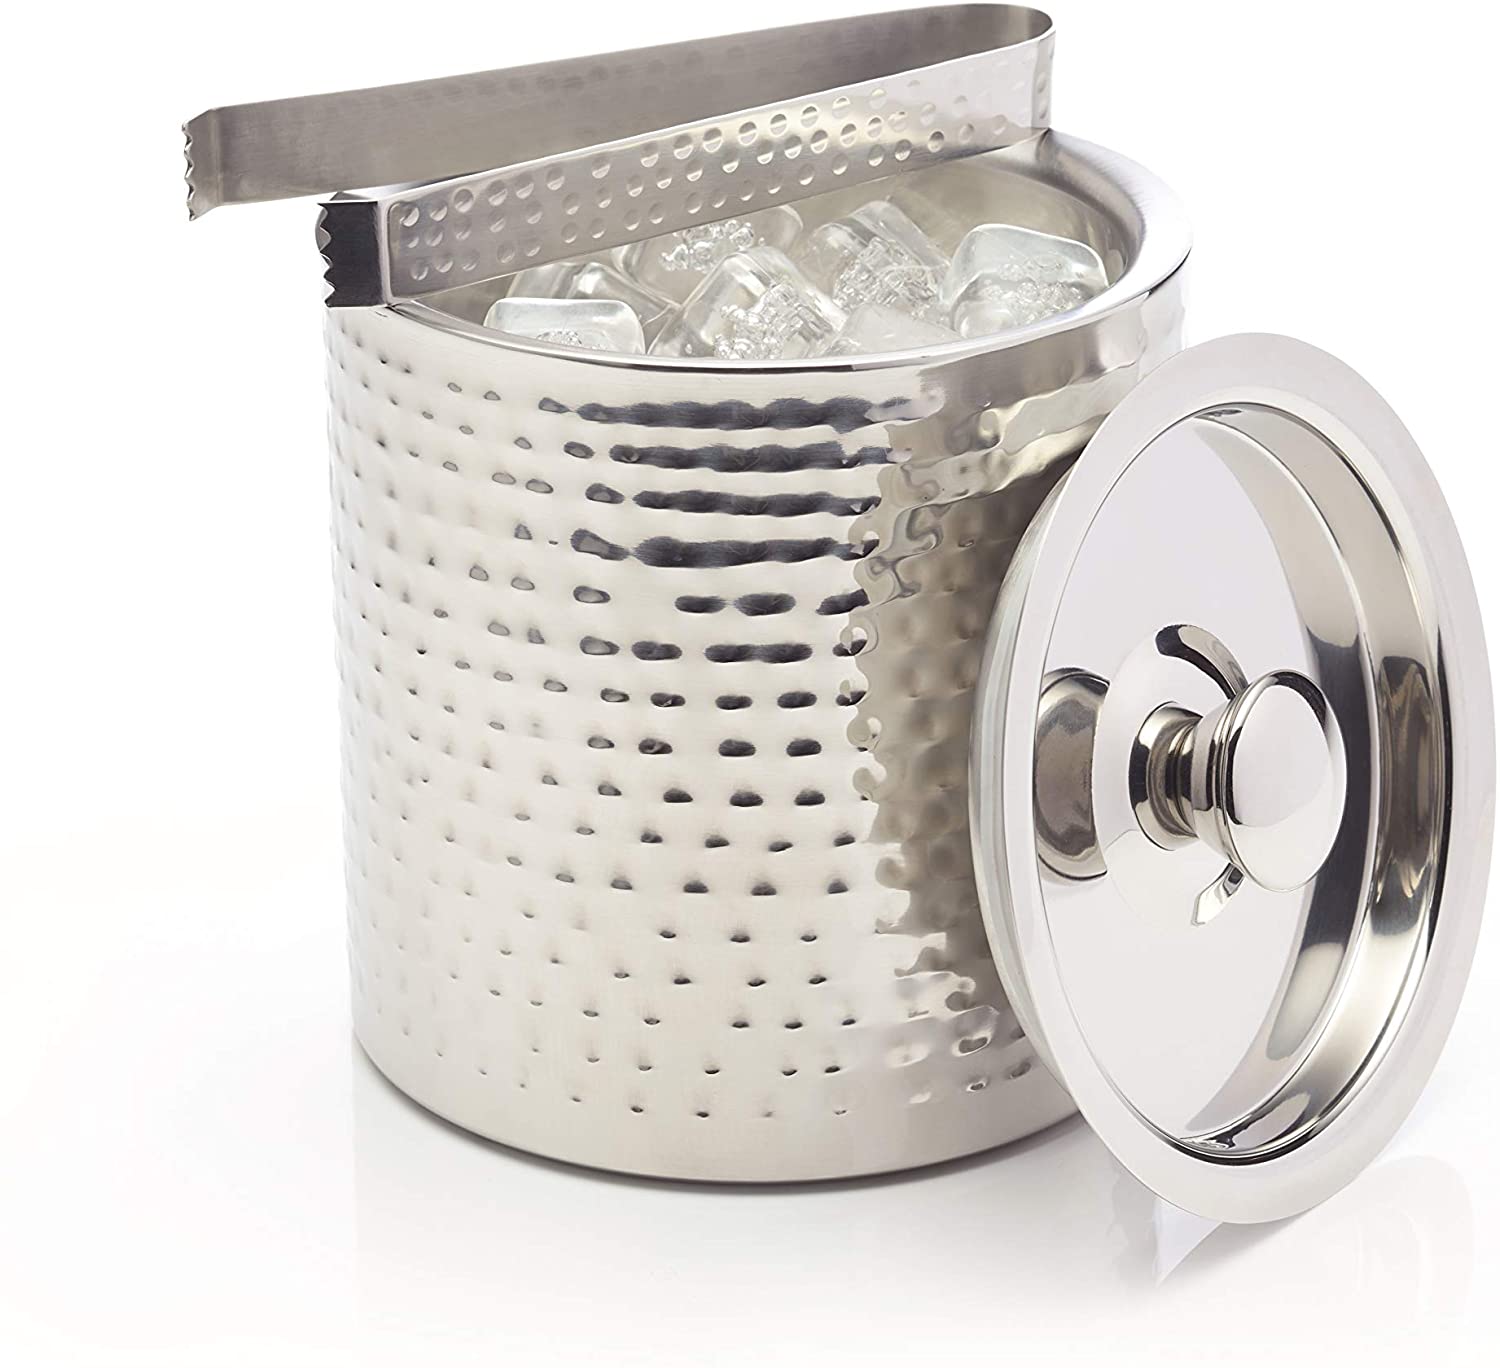 KitchenCraft BarCraft Stainless Steel Ice Bucket with Lid and Tongs, 1.5 Litre